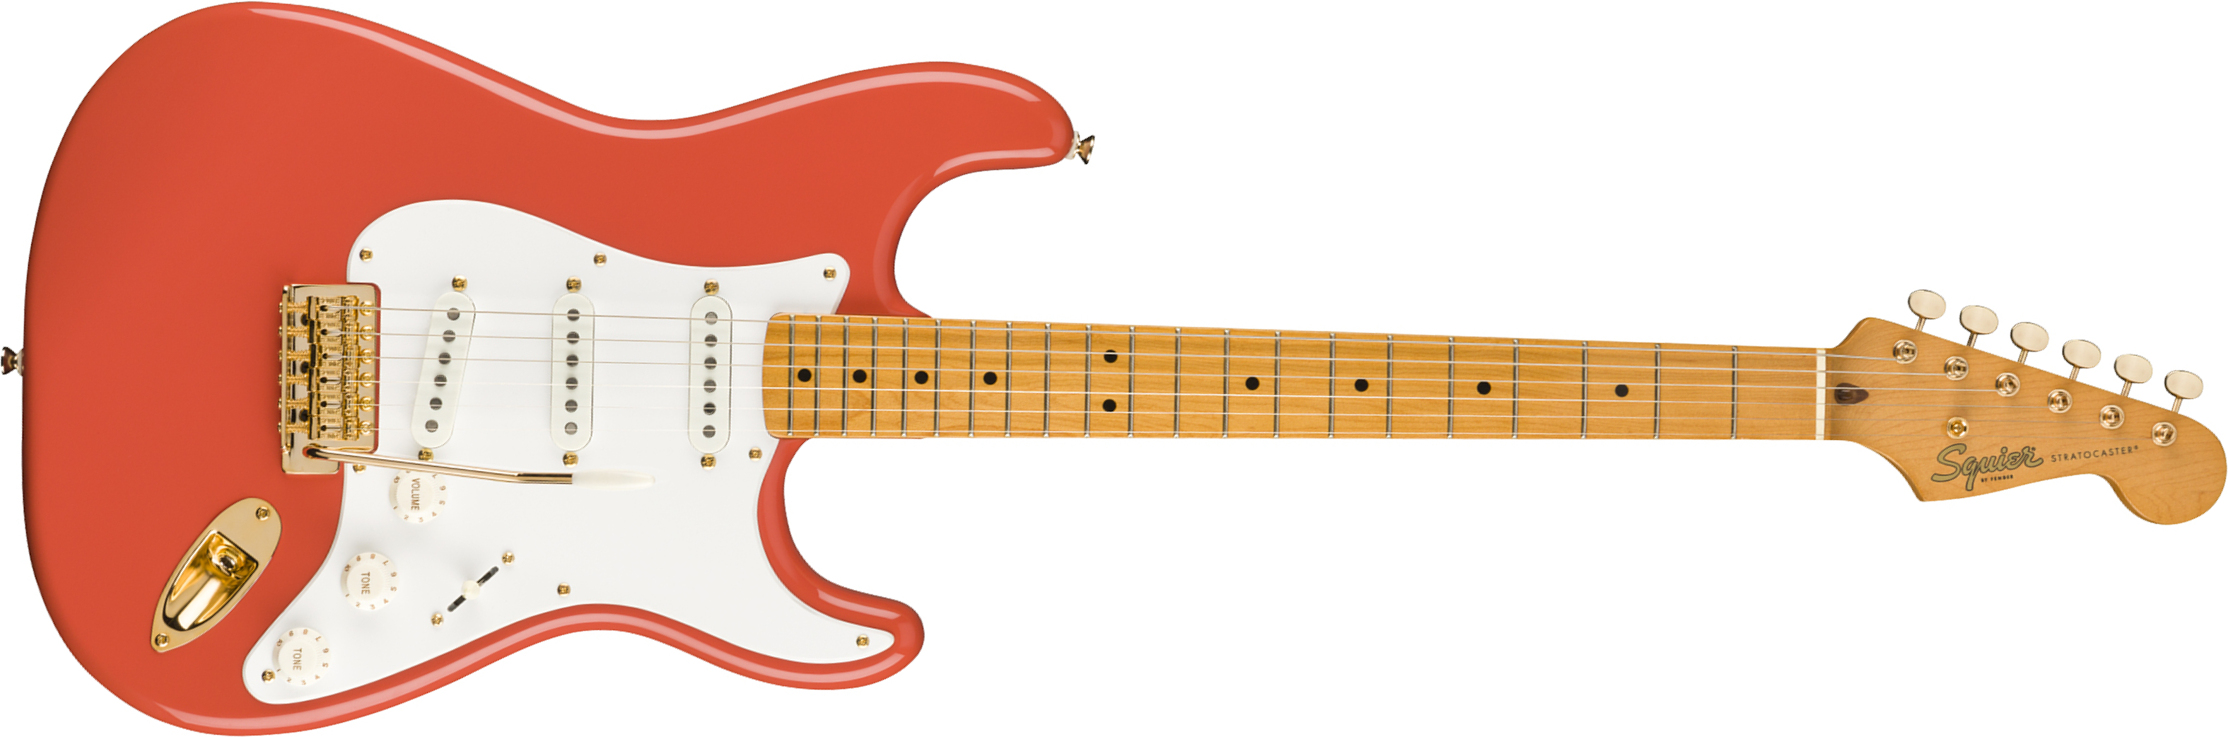 Squier Strat Classic Vibe '50s Fsr Ltd Mn - Fiesta Red With Gold Hardware - Guitare Électrique Forme Str - Main picture